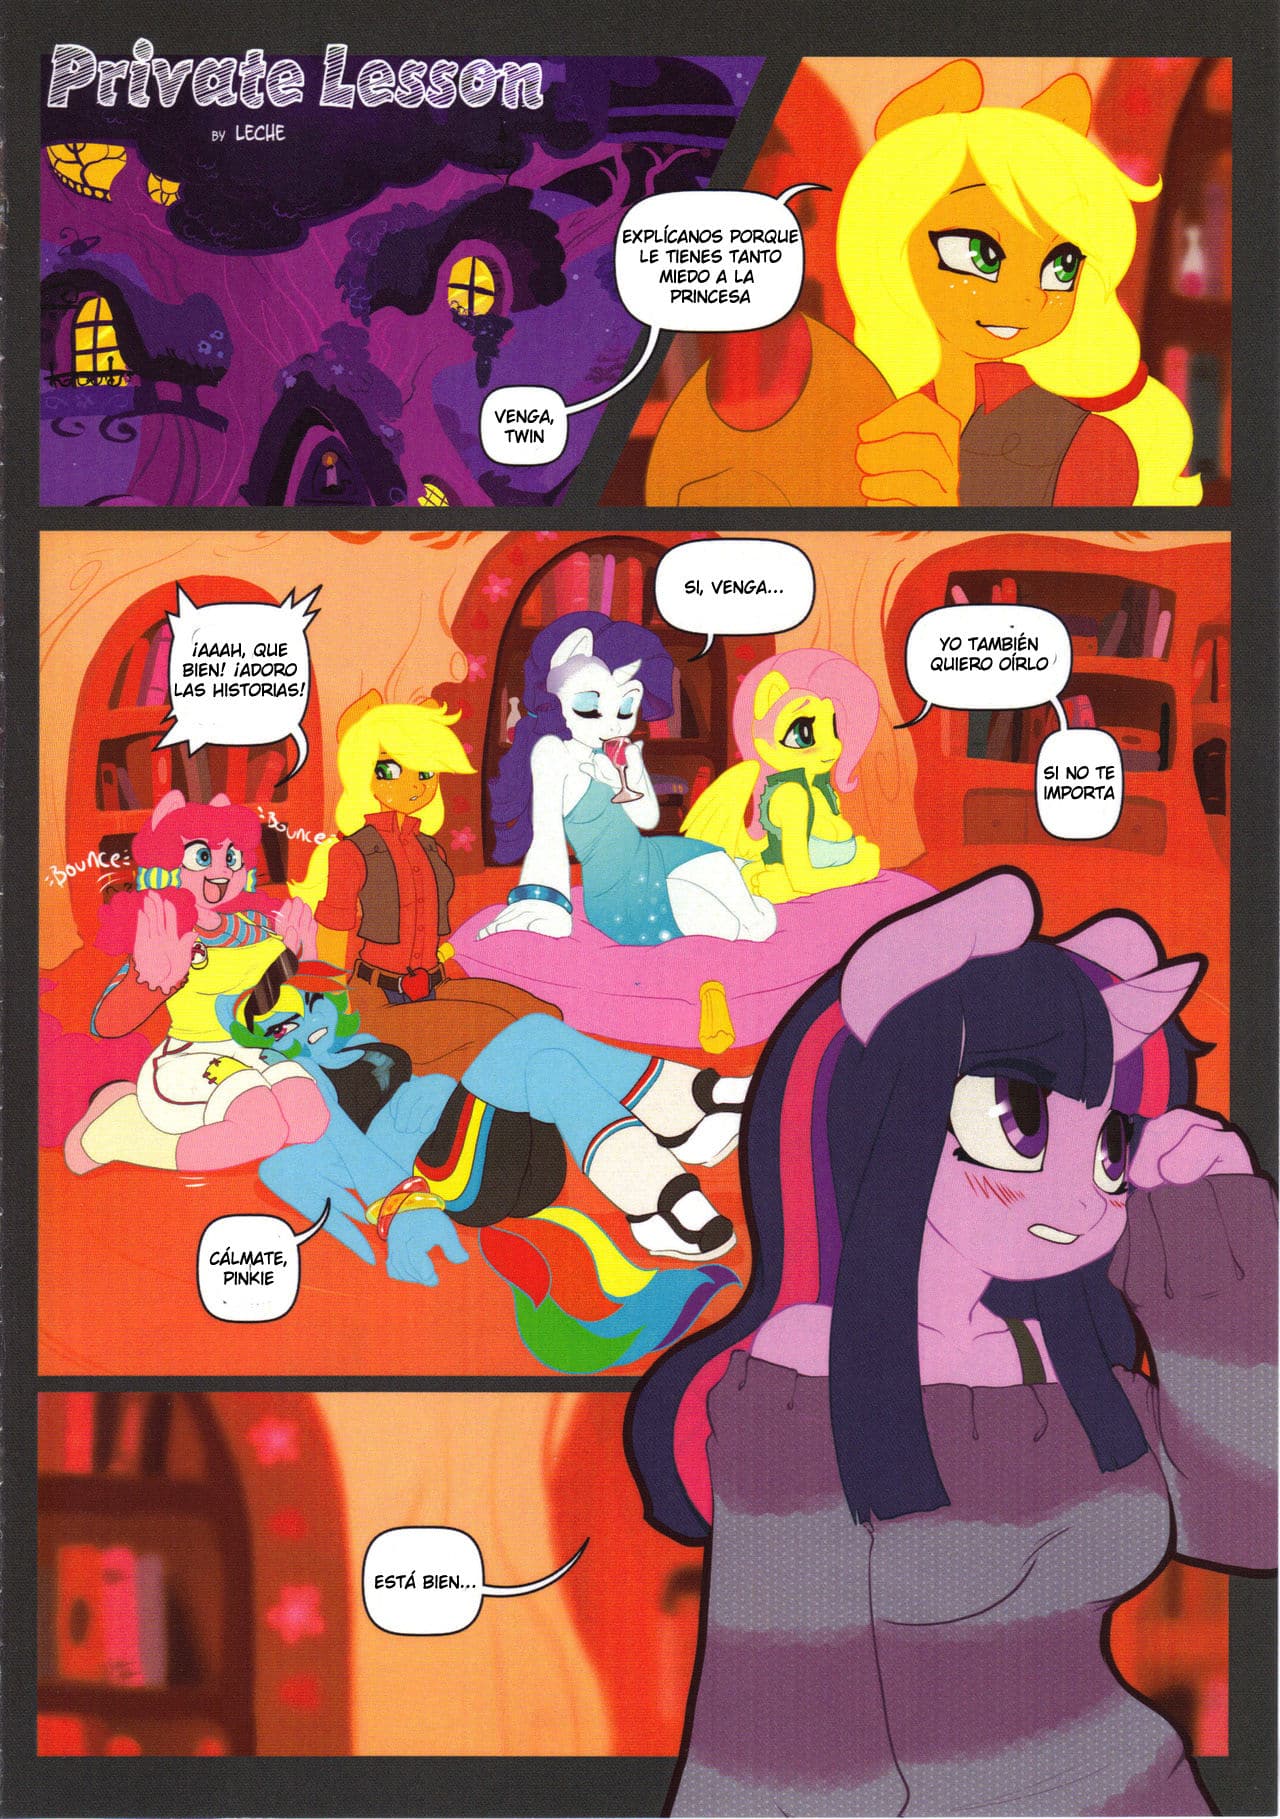 Hoof Beat 2 – Another Pony Fanbook - 5f8f5c92bc963d9497bf49fee5fd6d7c